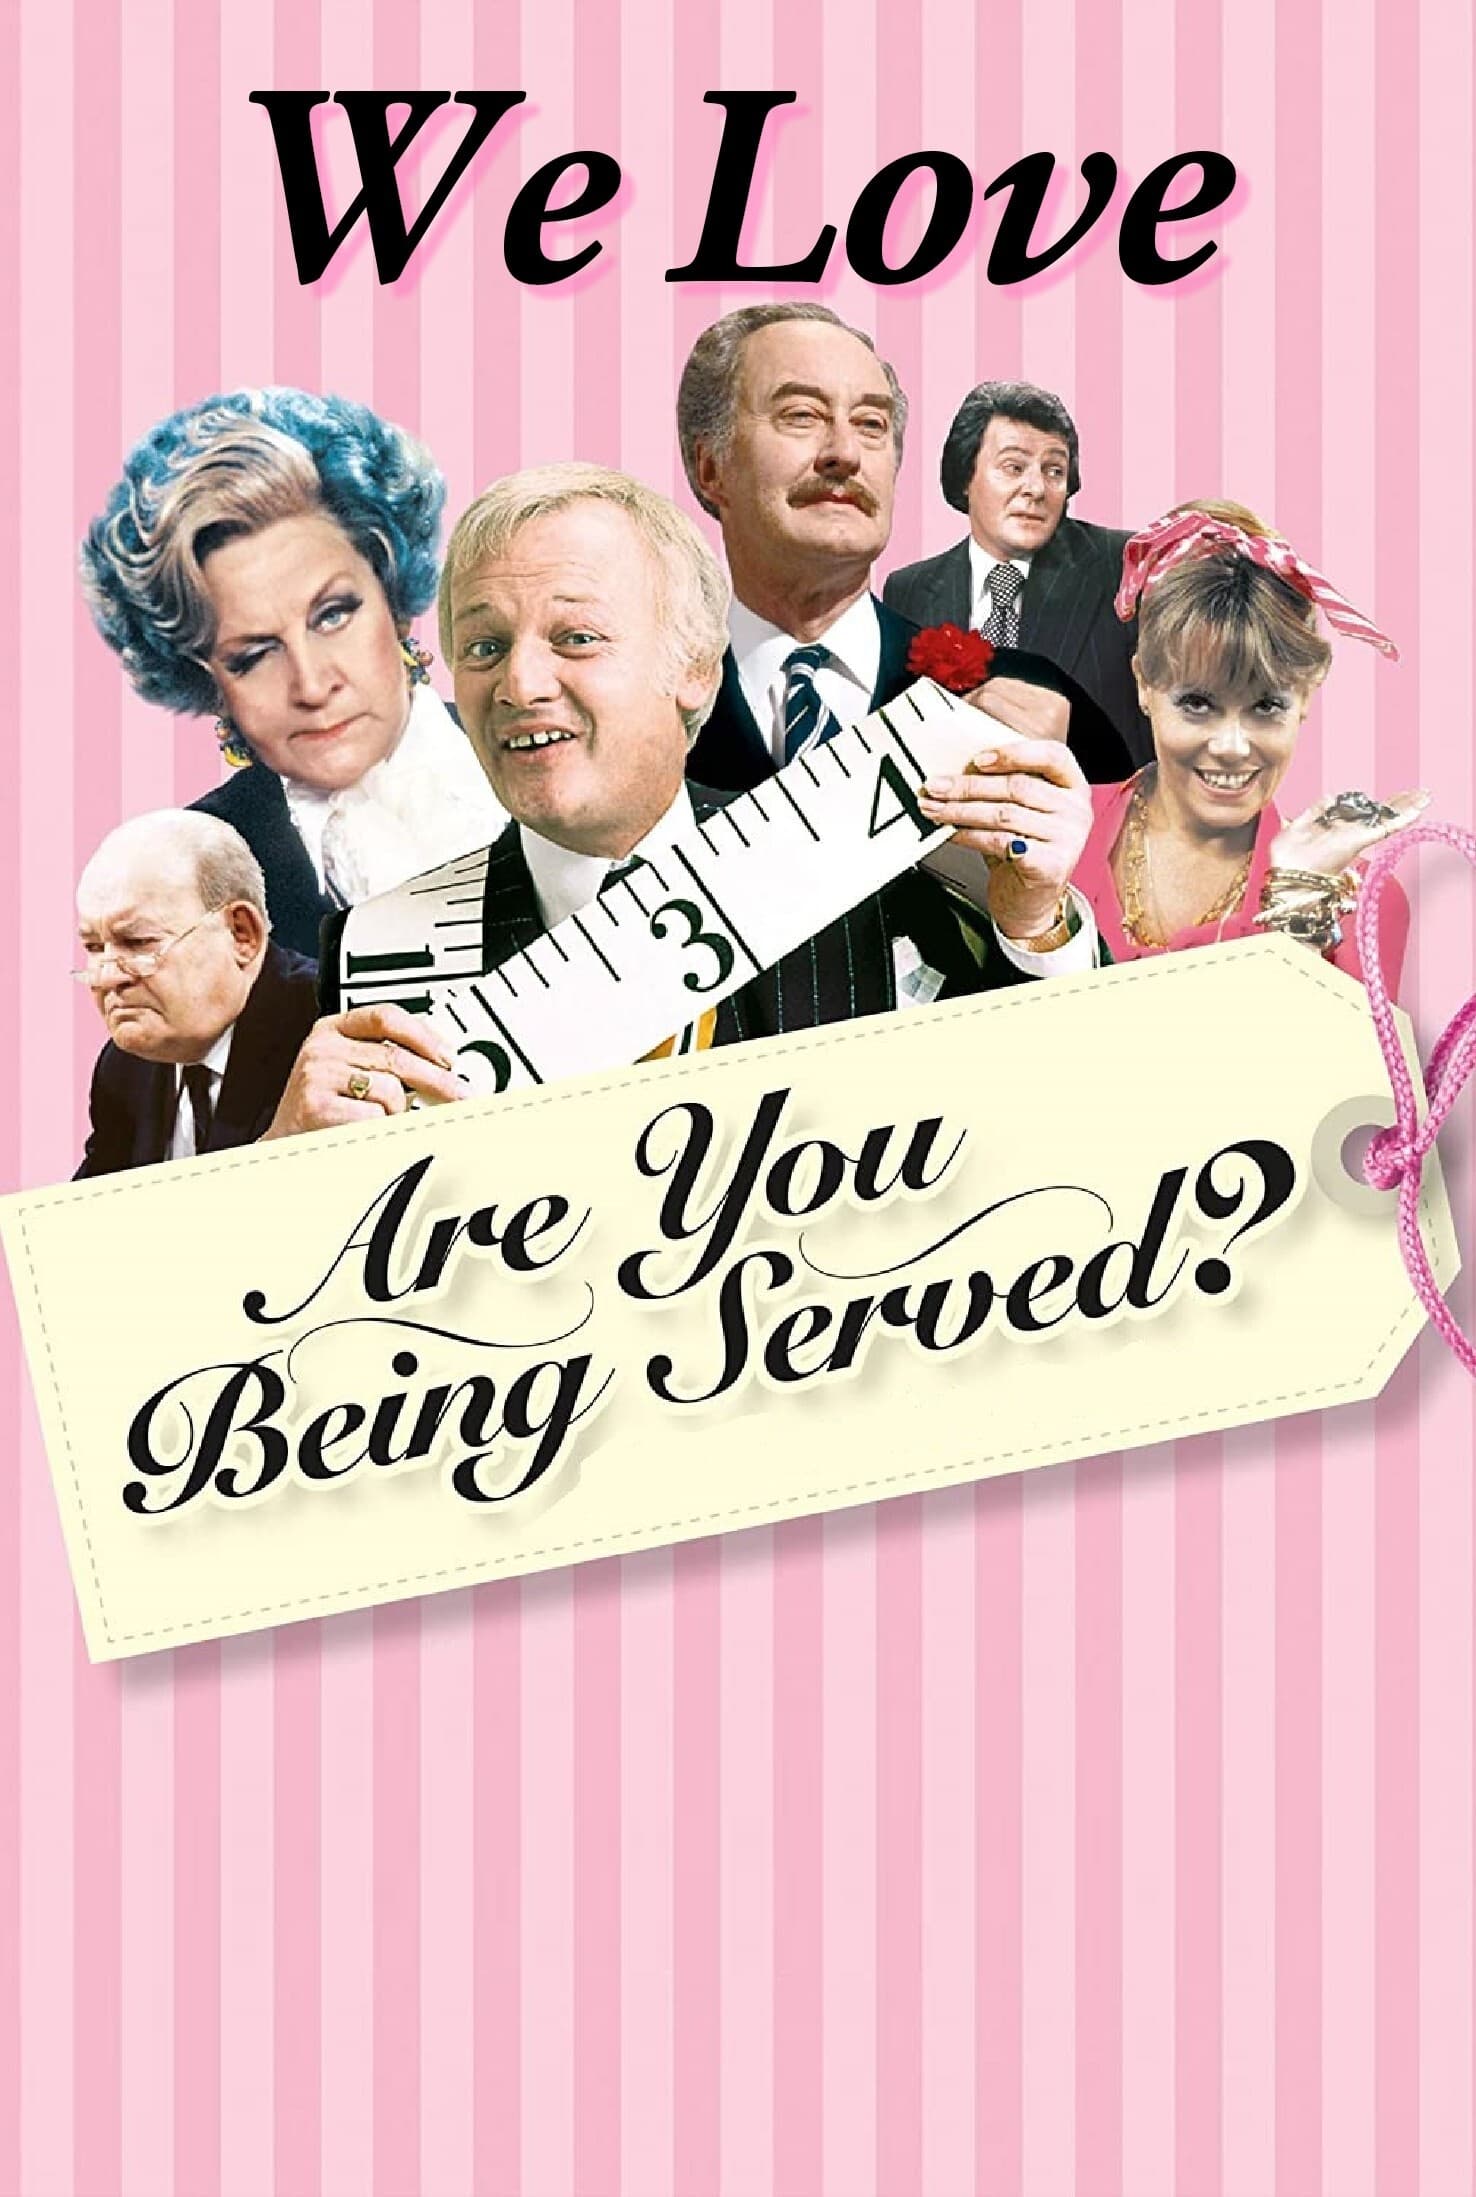 We Love Are You Being Served? (2020)